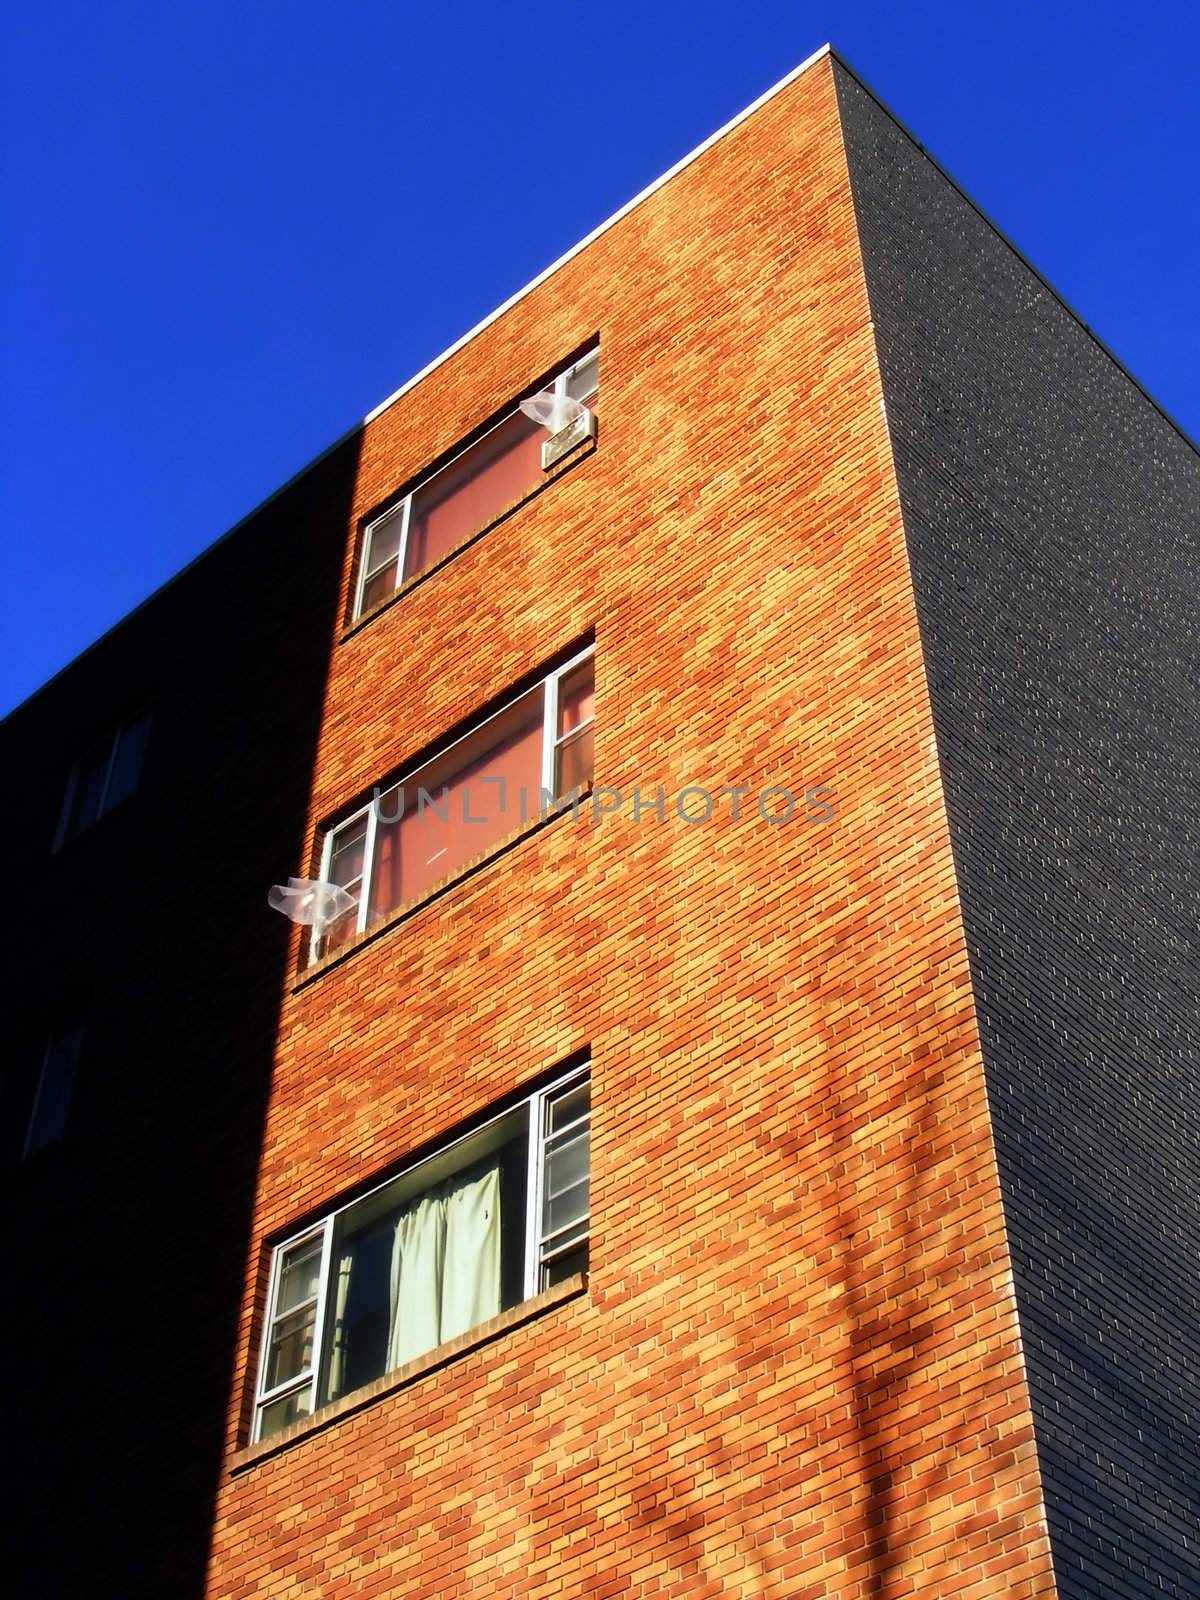 Abstract shape, light and shadow define the form of this old apartment building.